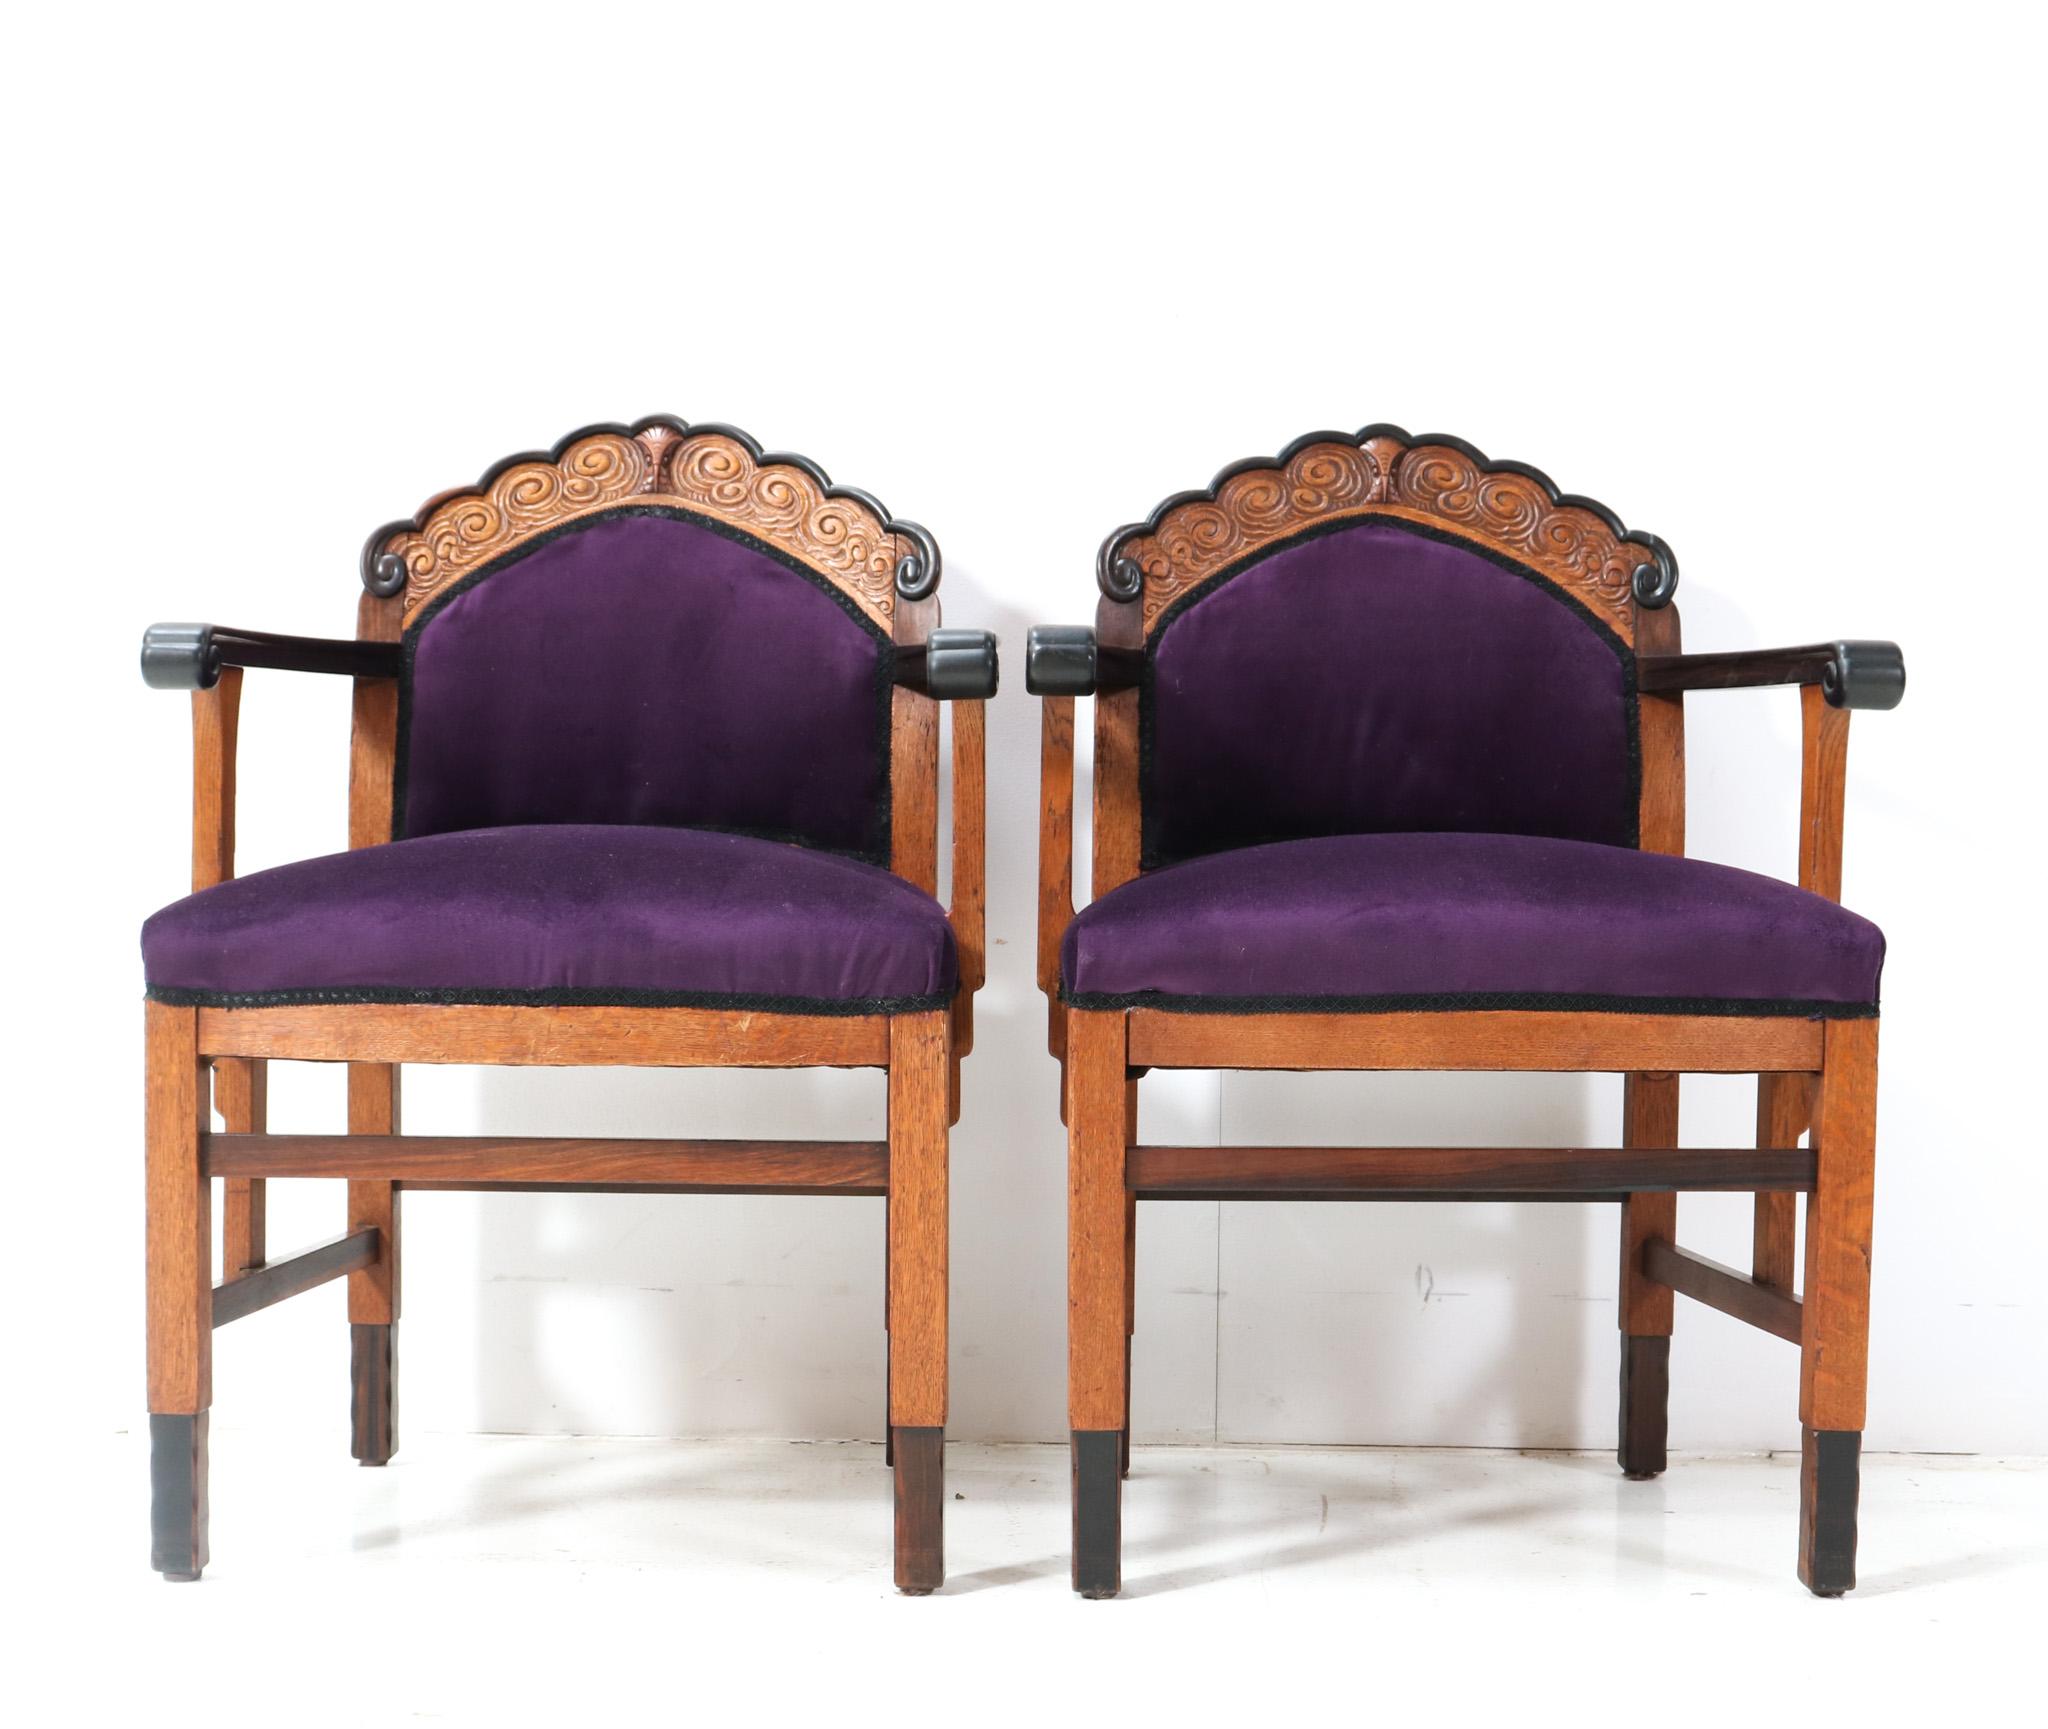 Early 20th Century Two Oak Art Deco Amsterdamse School Armchairs, 1920s For Sale